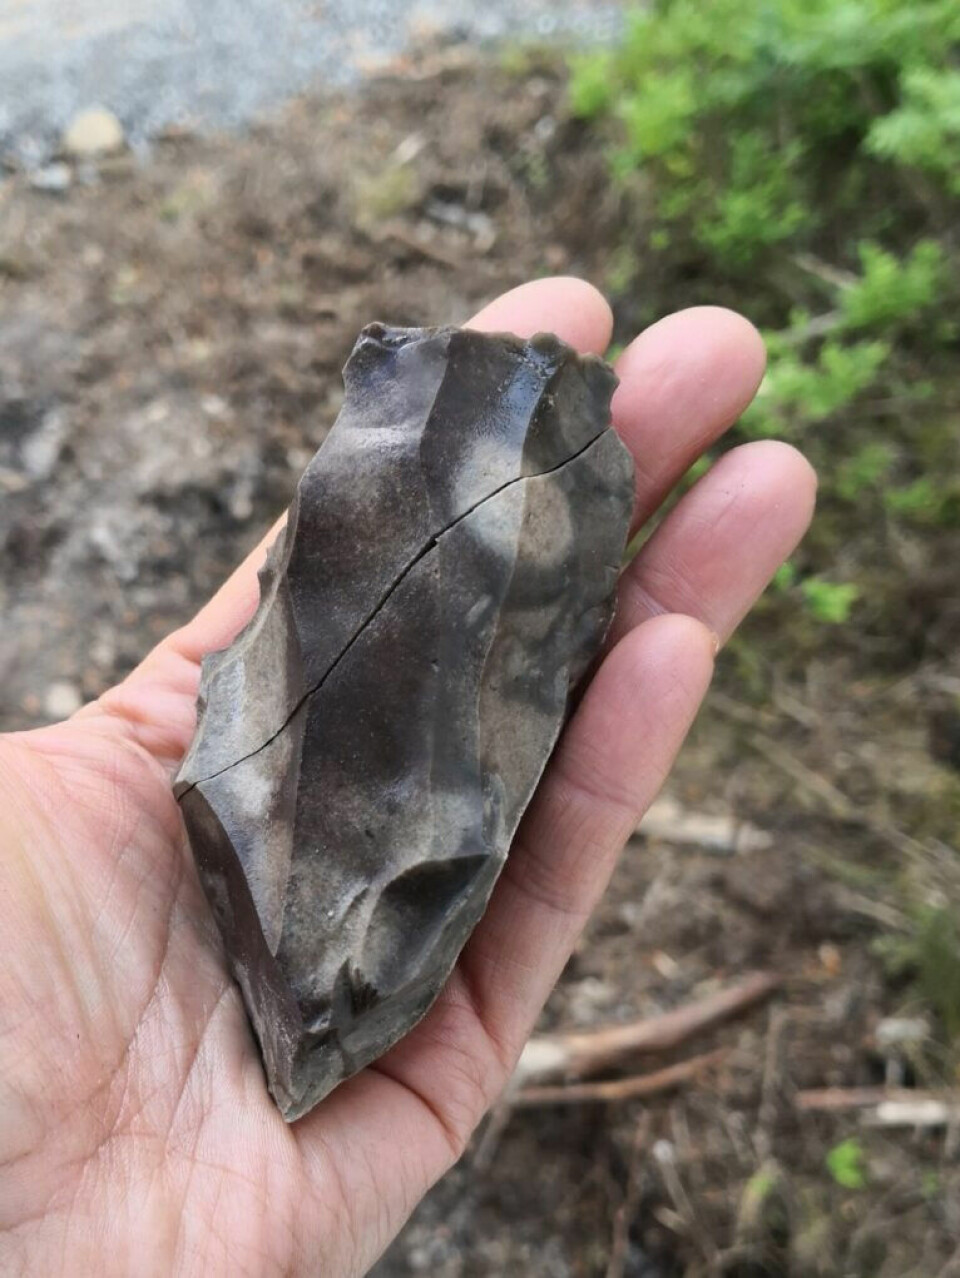 An unusually large piece of flint that has cracked across and then been discarded. There is still a lot of fine flint left that could have been used further, but for some reason, it has not been.